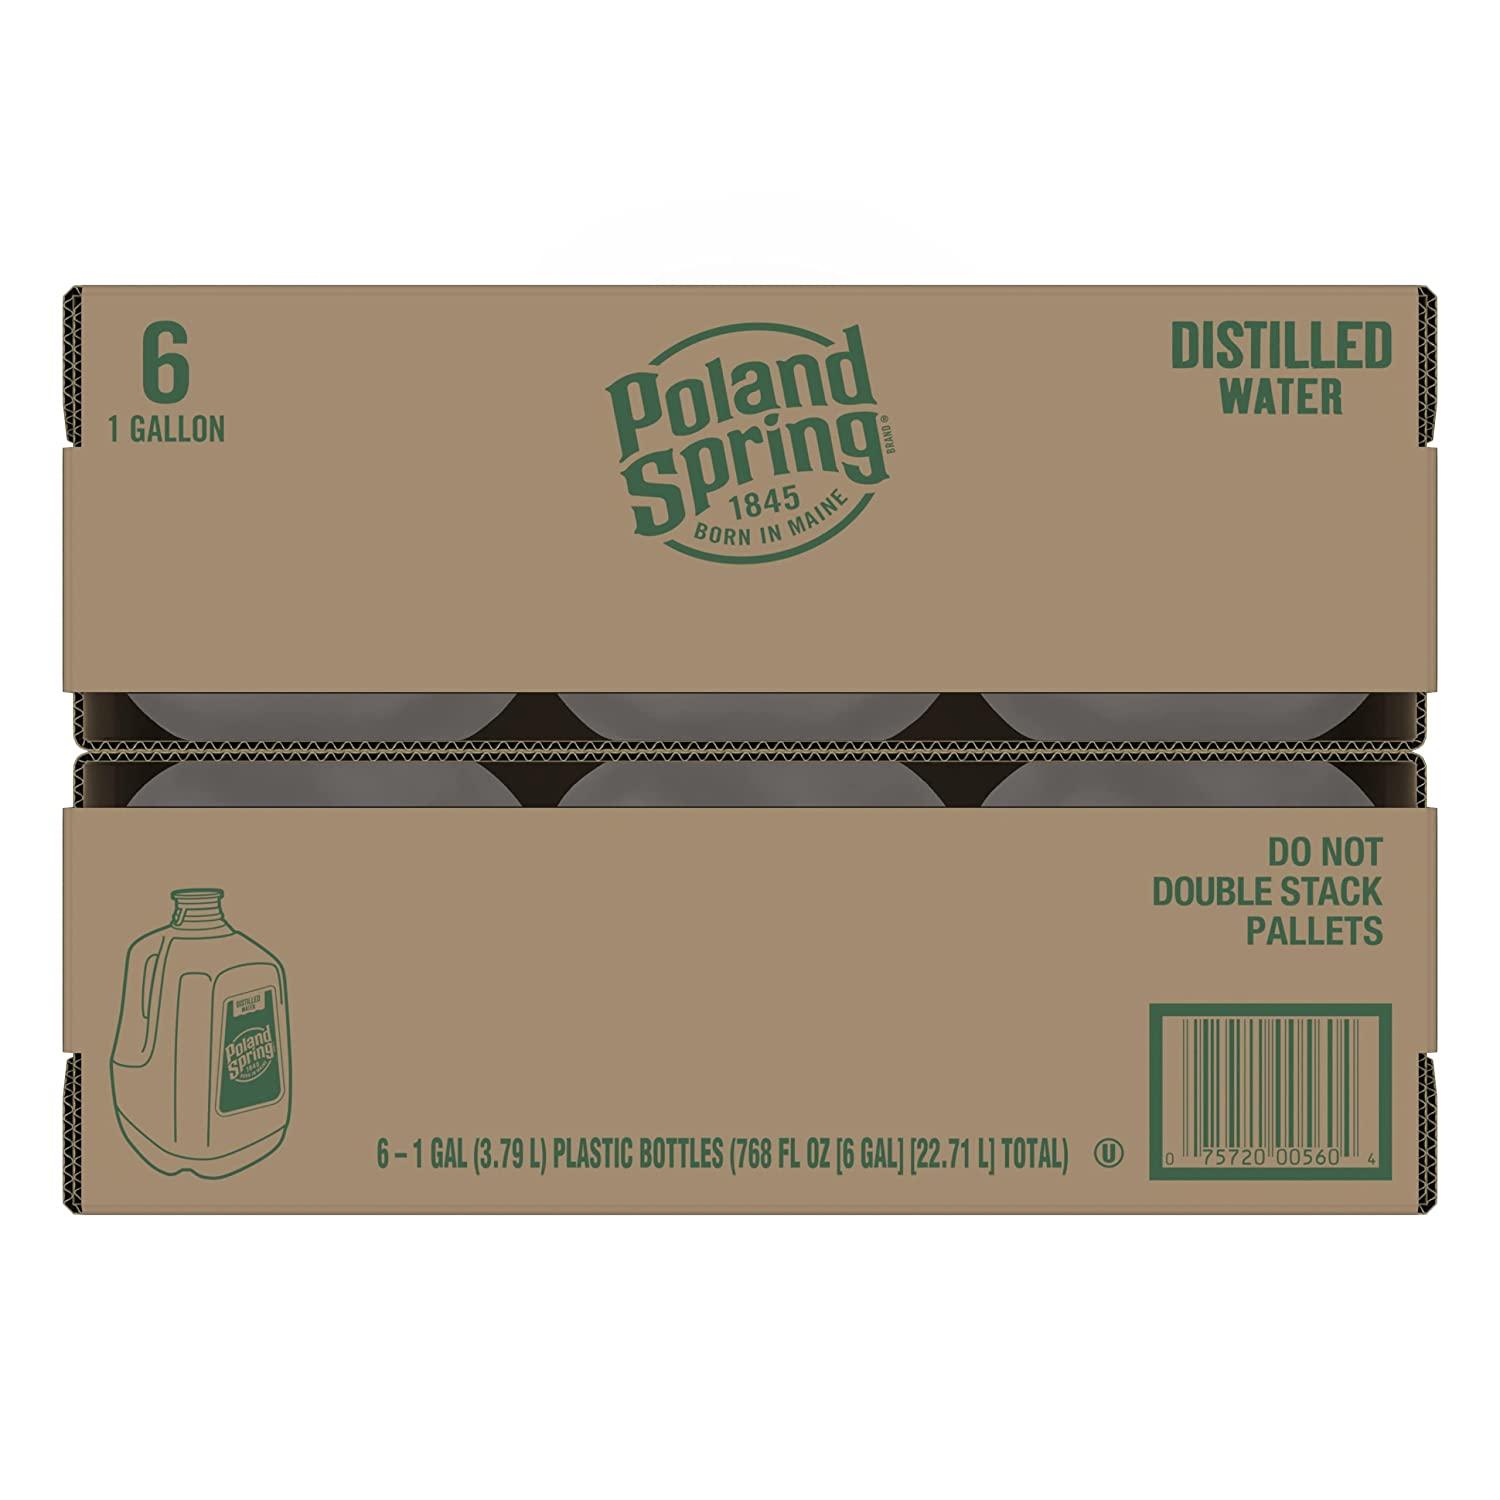 POLAND SPRING Brand Distilled Water, 1-gallon plastic jugs (Two Packs of 6)